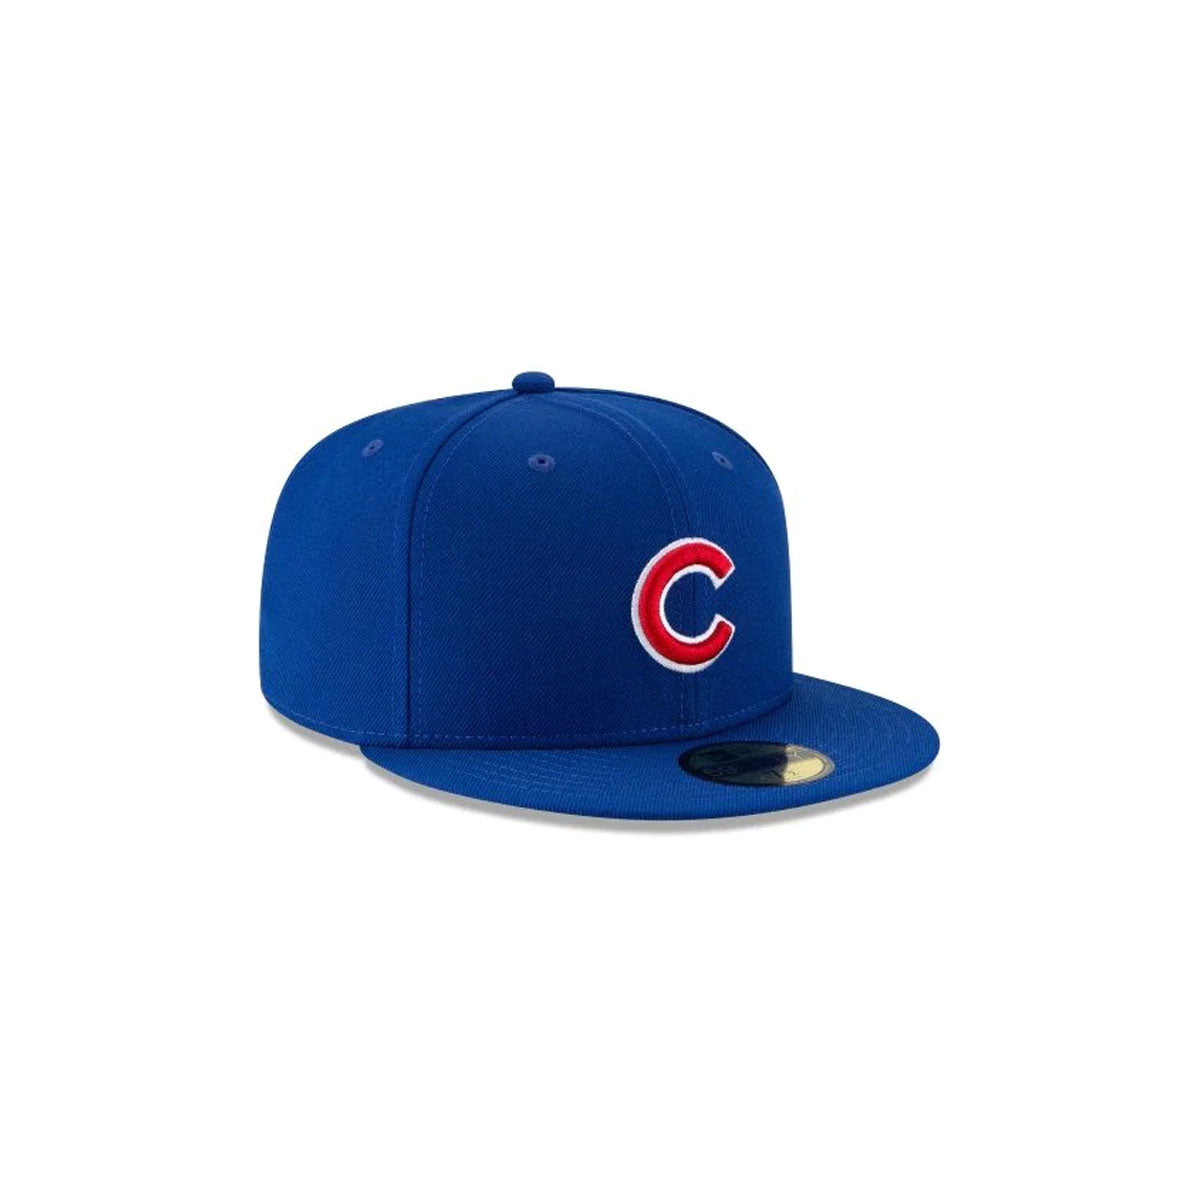 New Era Chicago Cubs 2016 World Series Patch 59Fifty Fittec Cap